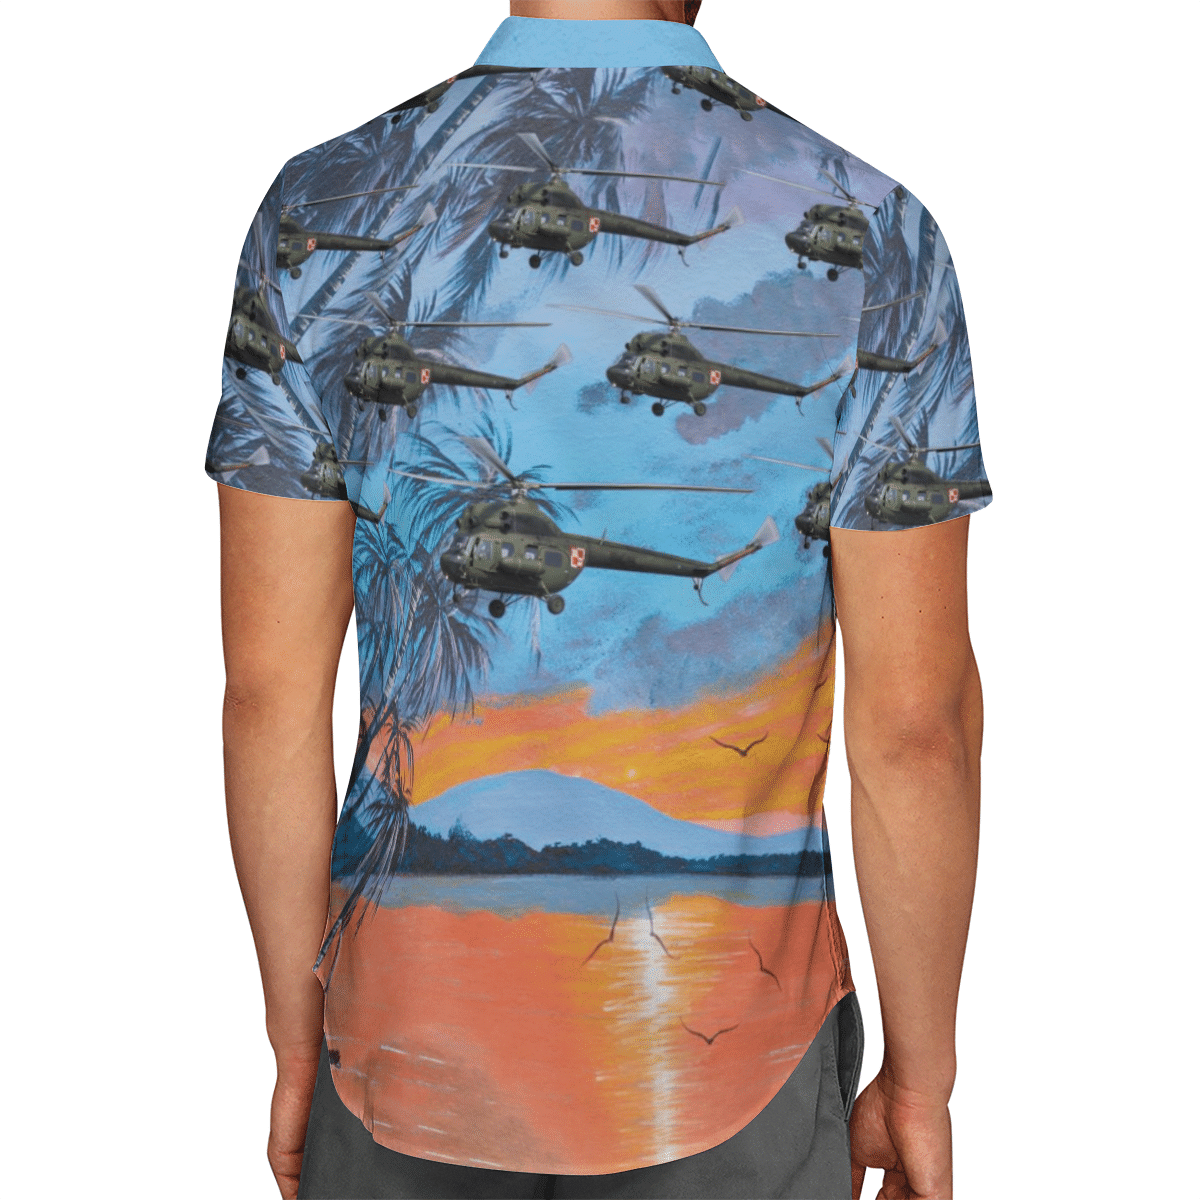 Going to the beach with a quality shirt 188